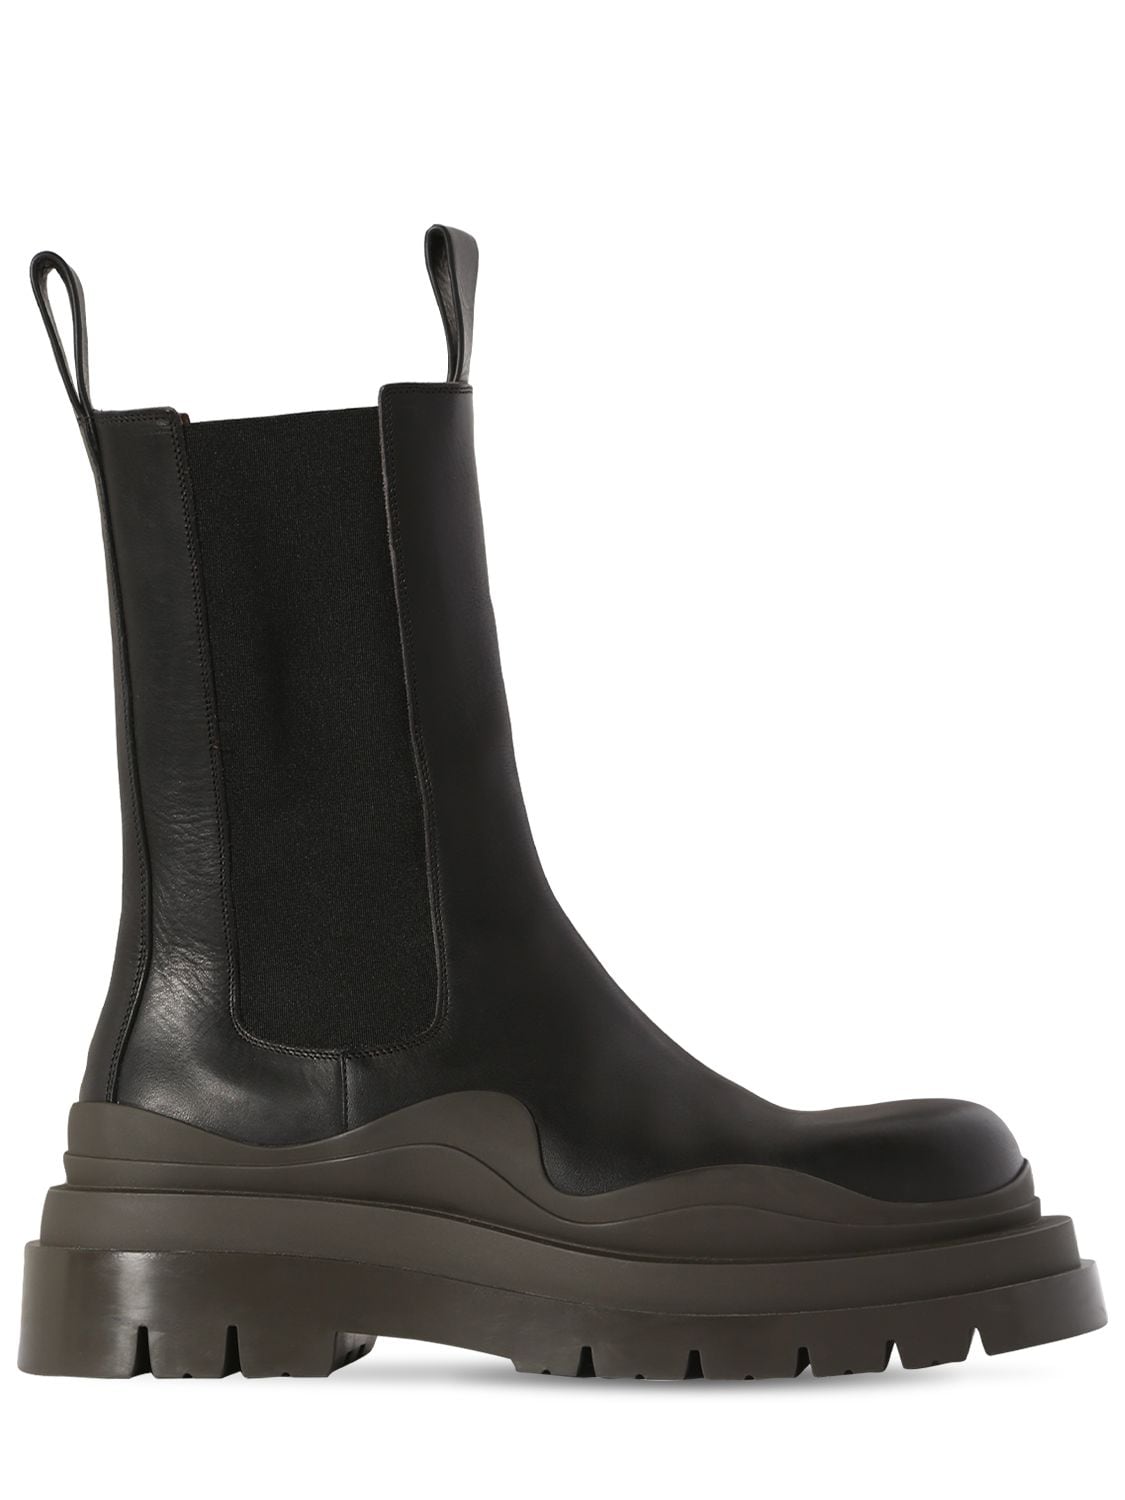 Bv Tire Leather Chelsea Boots